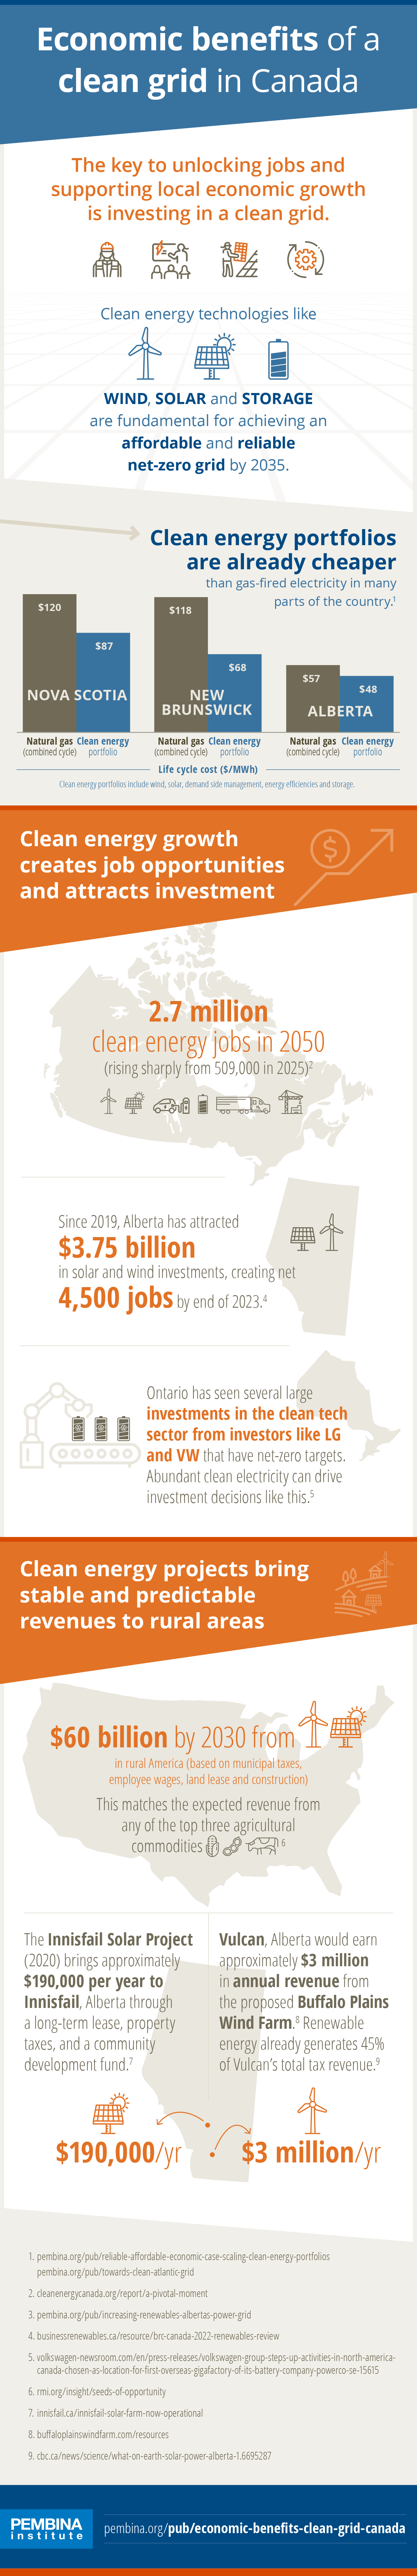 Economic benefits of a clean grid in Canada infographic